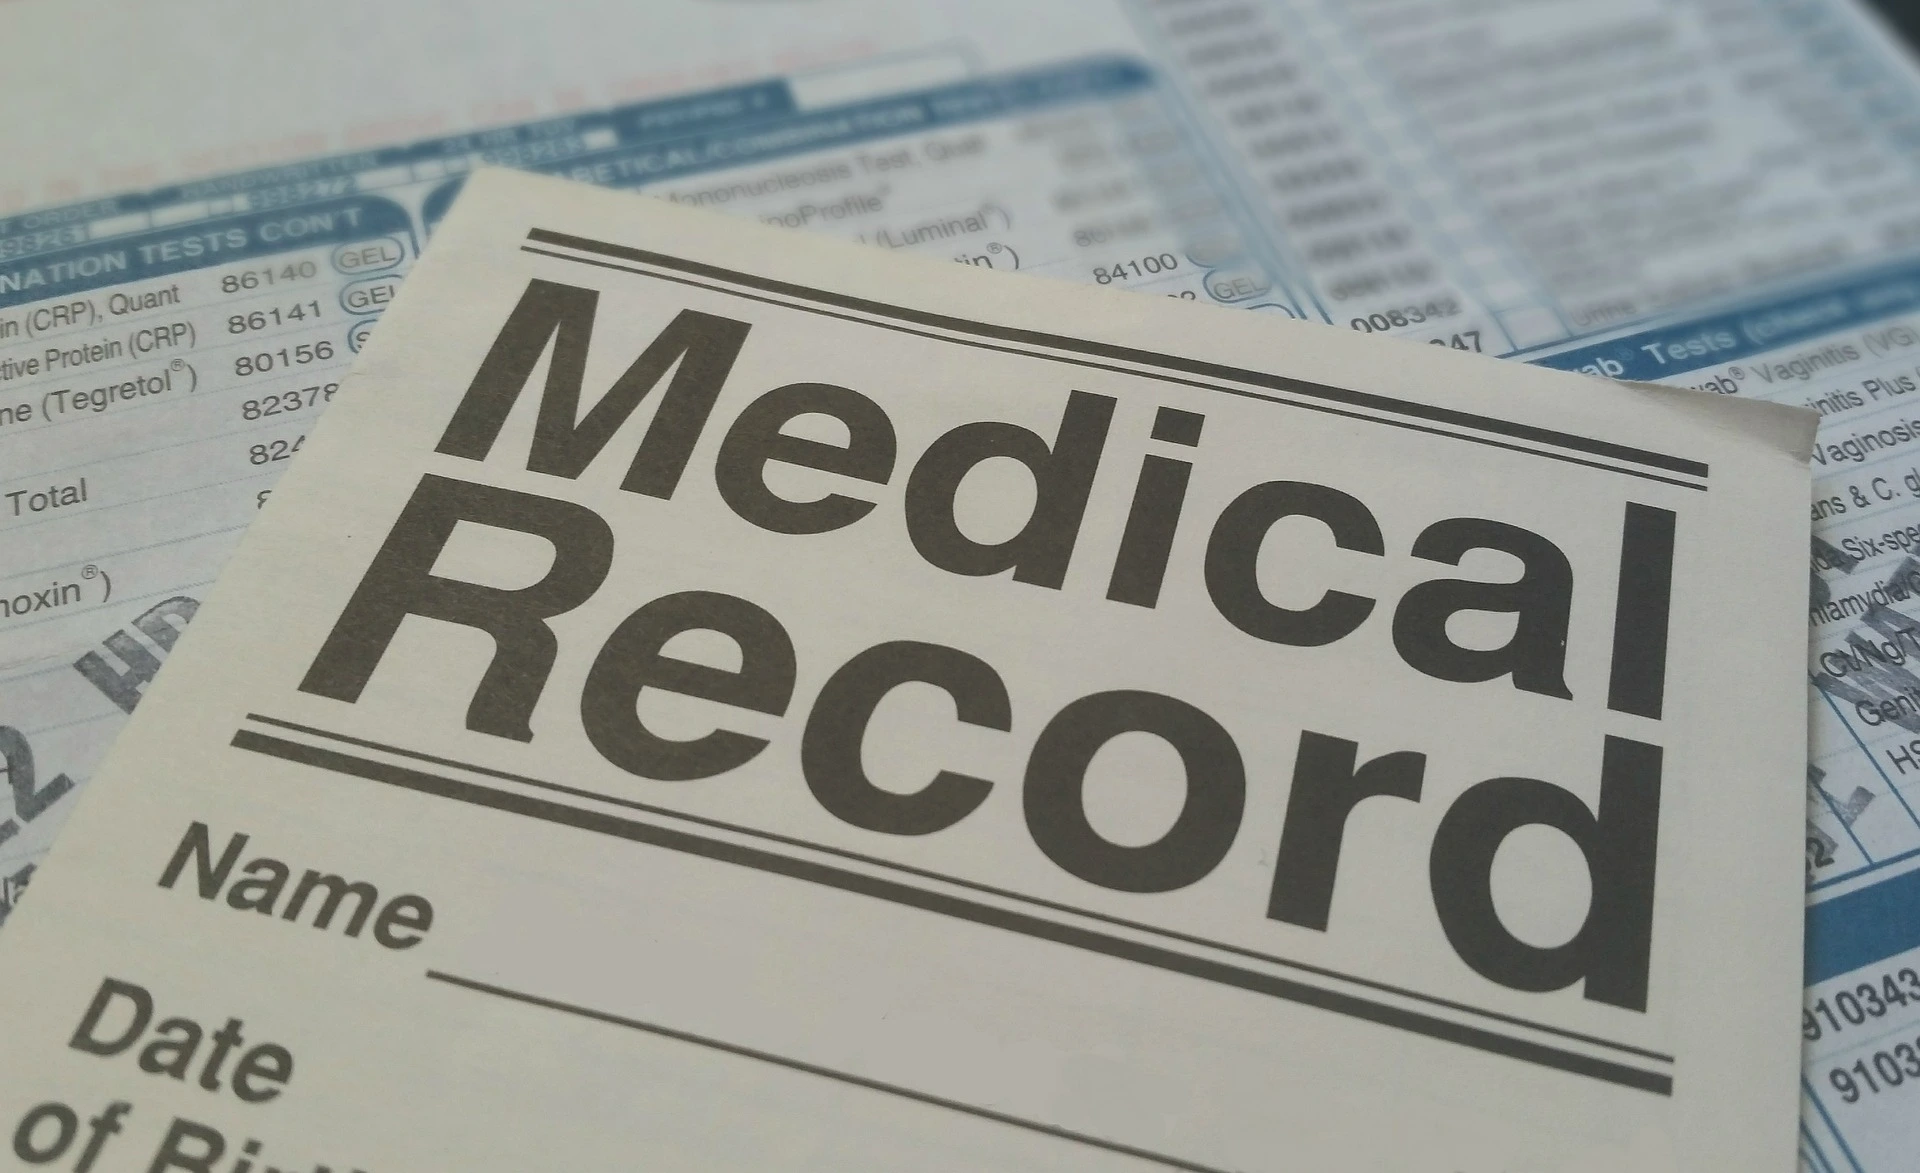 Access to Health Records Act (AHRA) for Deceased Patients